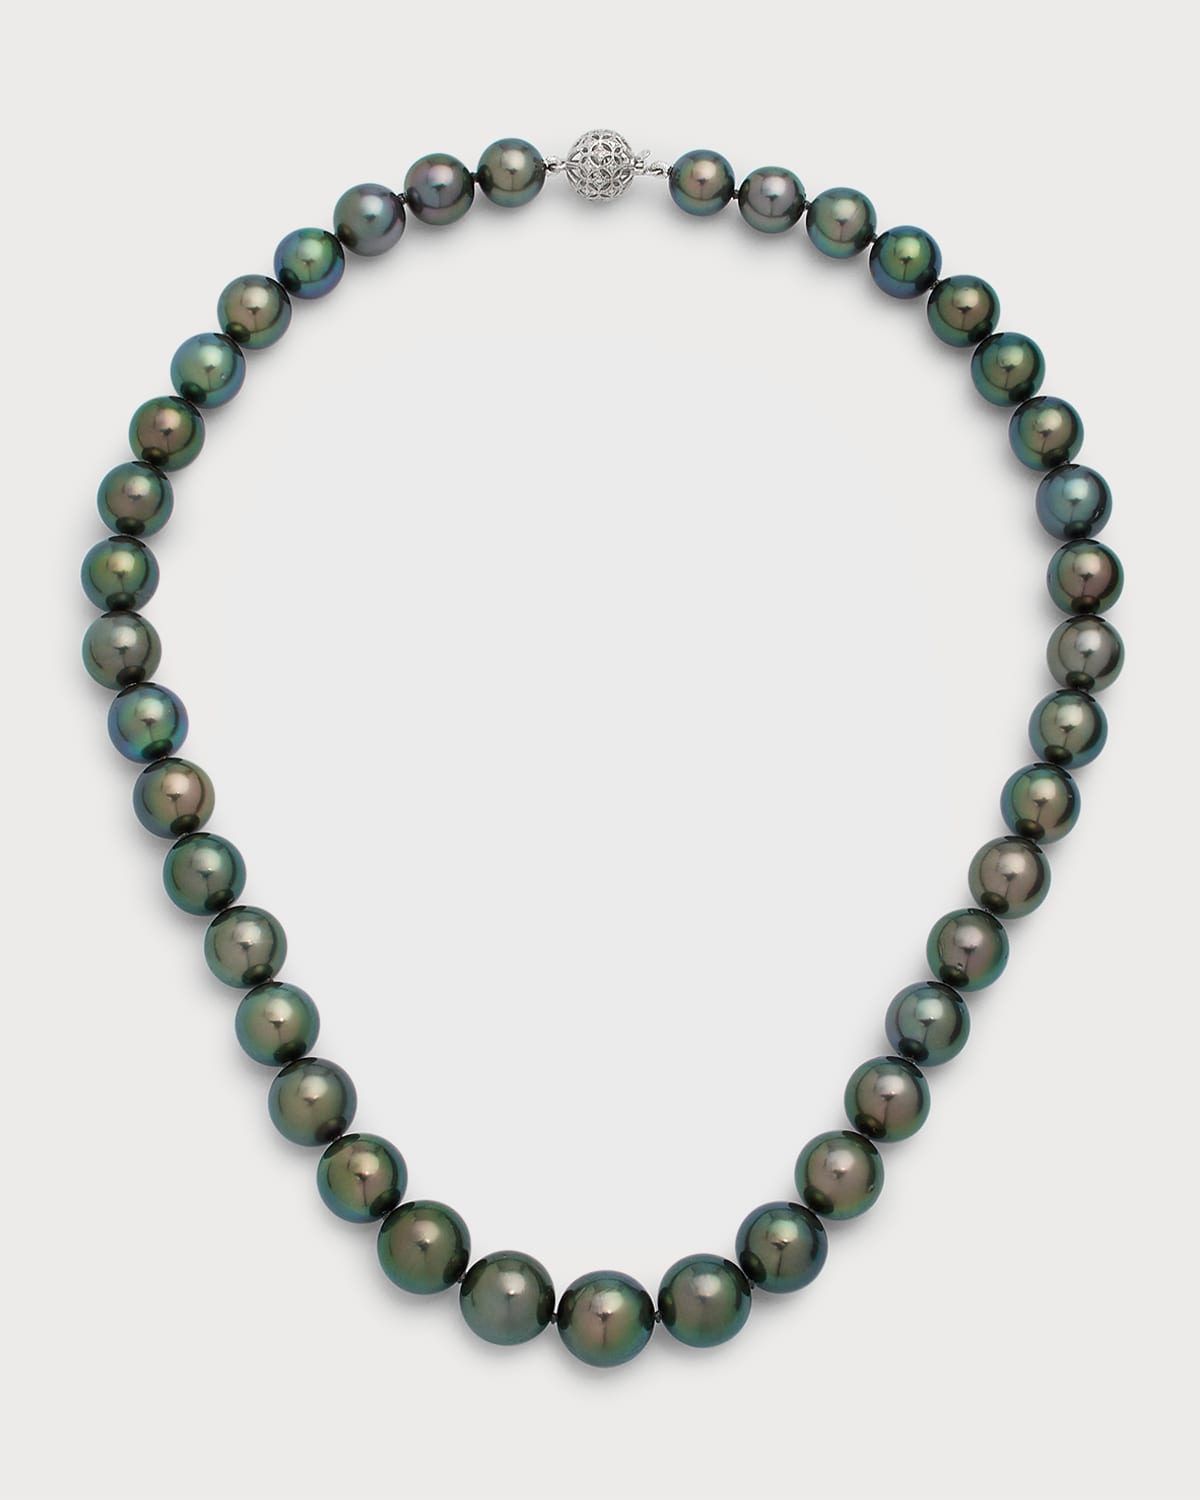 Belpearl 18k White Gold Tahitian Peacock Color Pearl Necklace